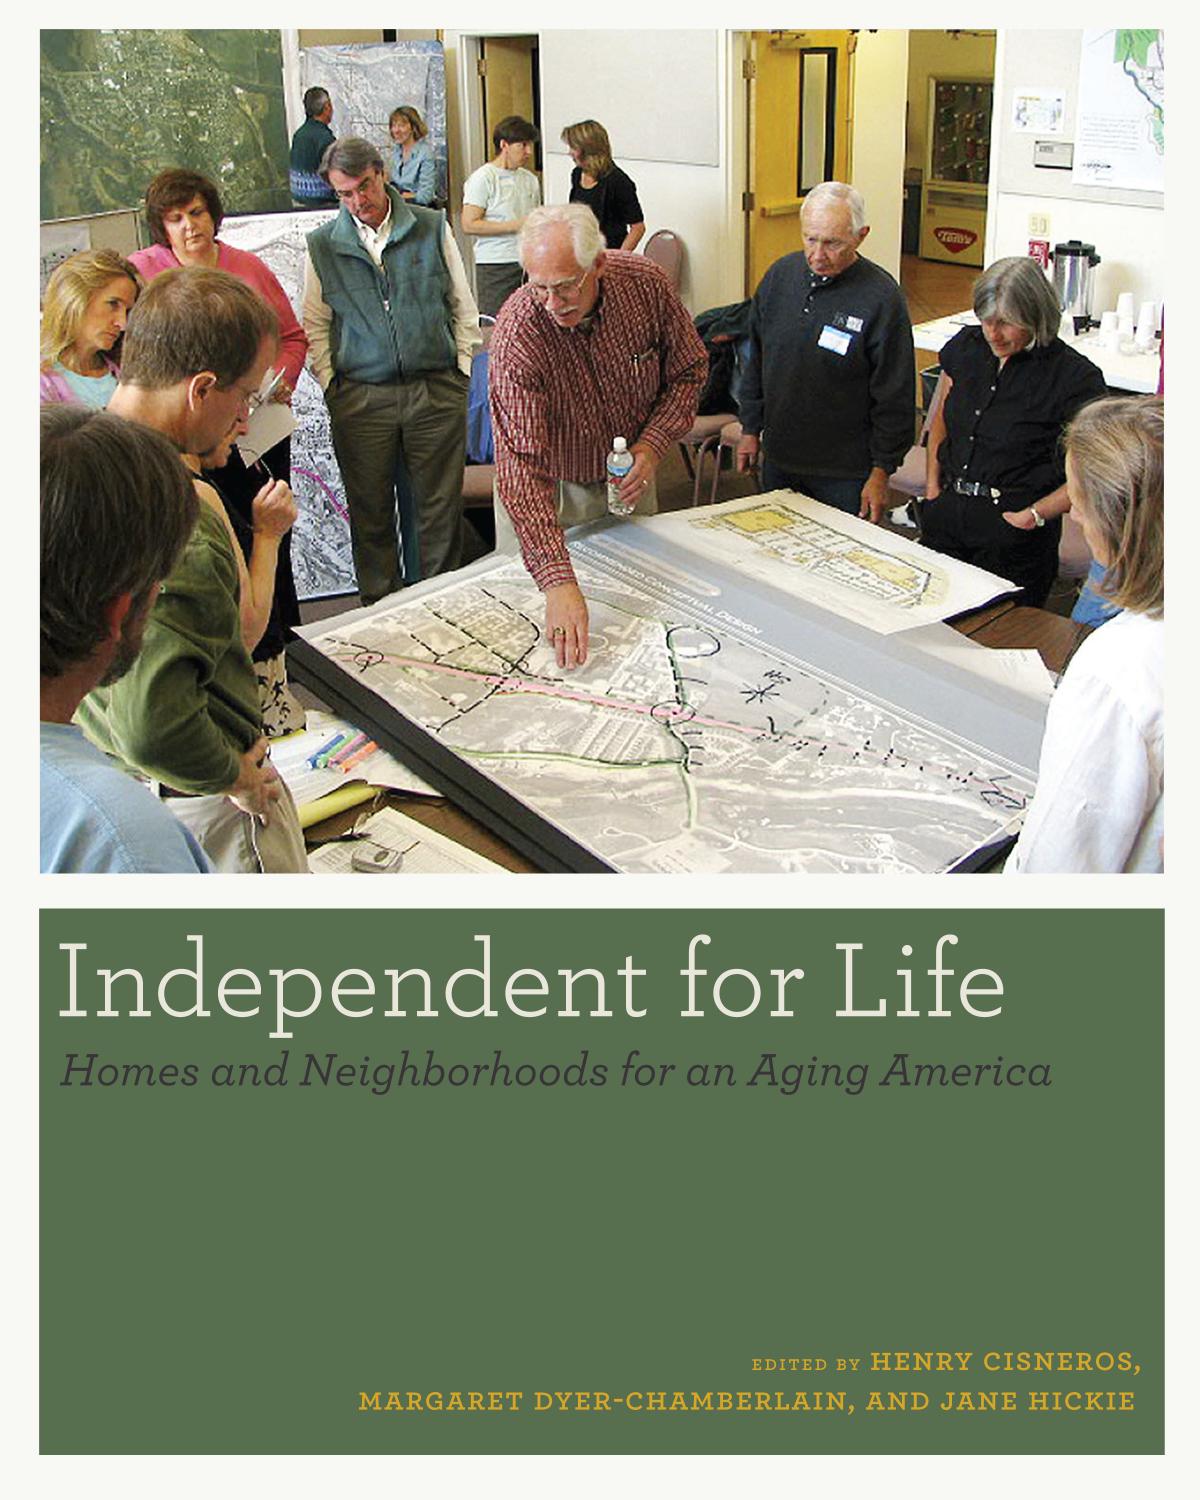 Independent for Life: Homes and Neighborhoods for an Aging America by Henry Cisneros; Margaret Dyer-Chamberlain; Jane Hickie